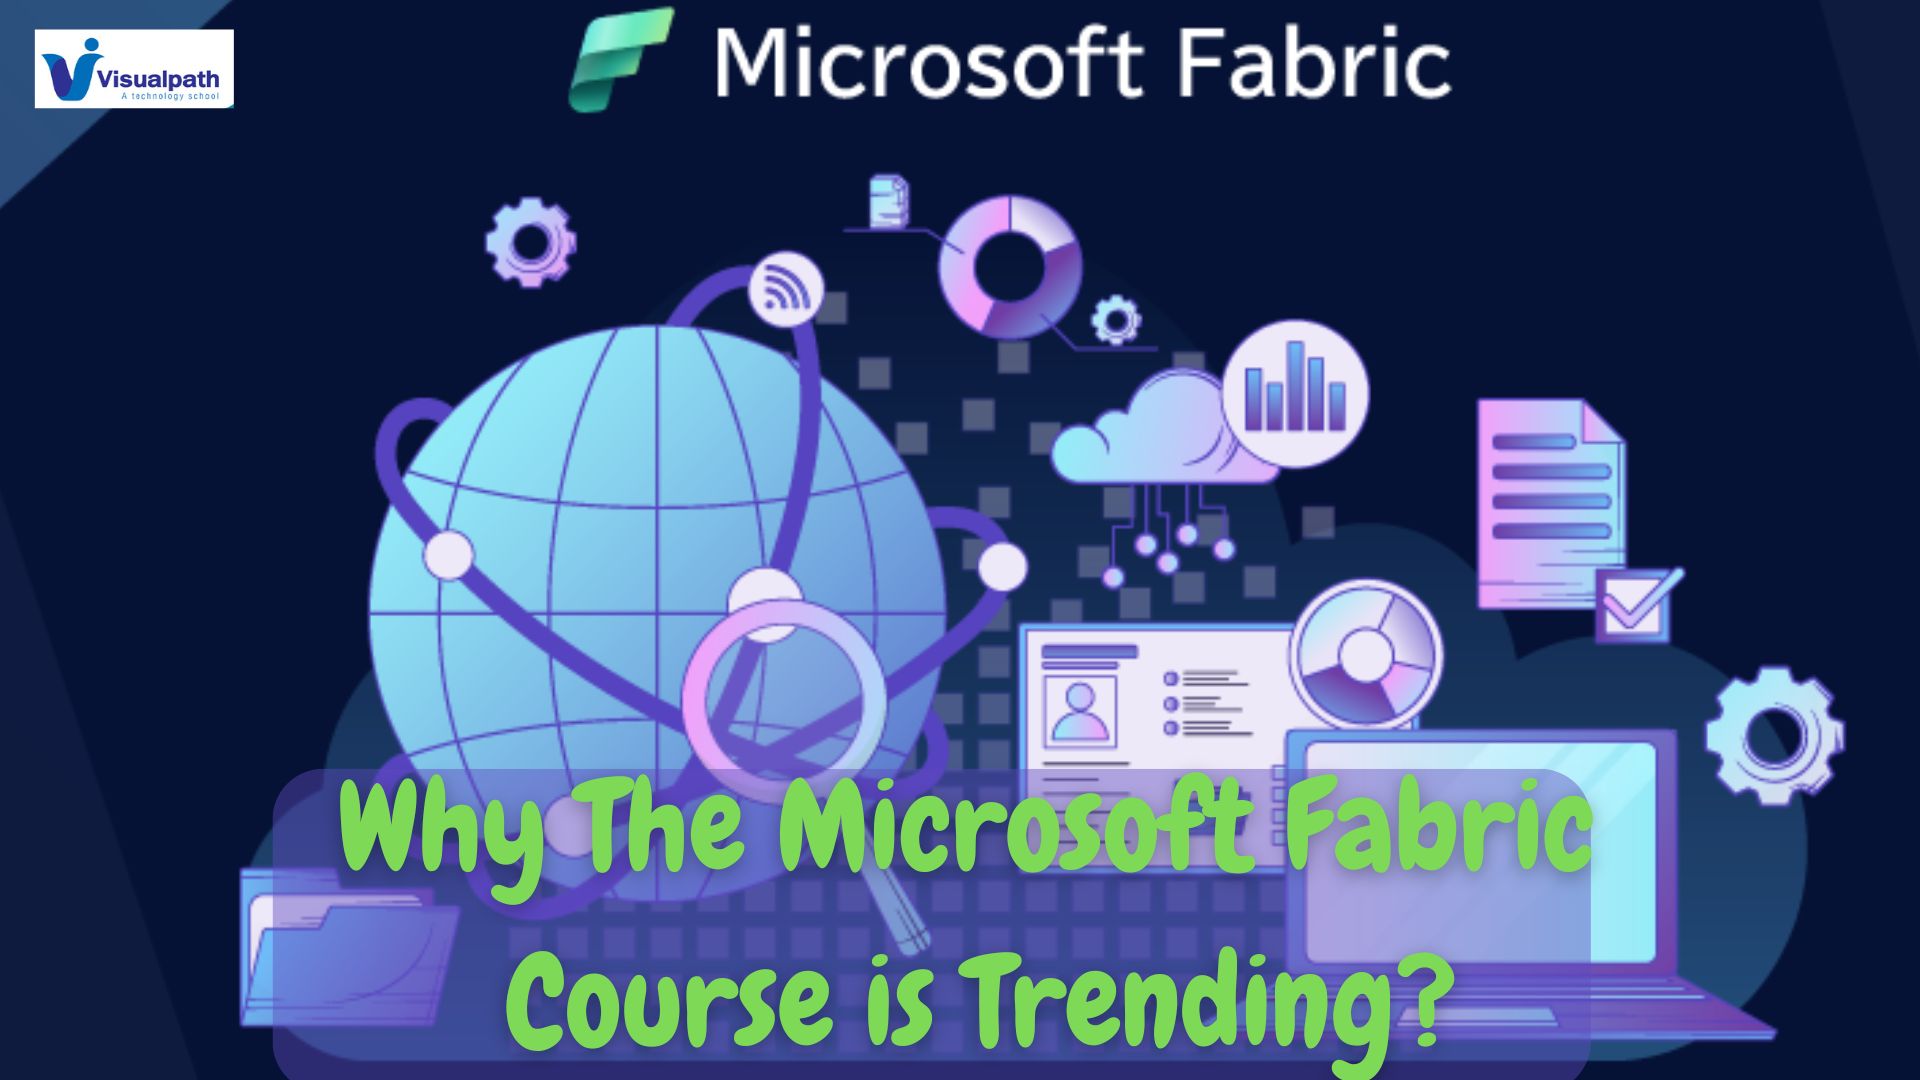 Why The Microsoft Fabric Course is Trending?